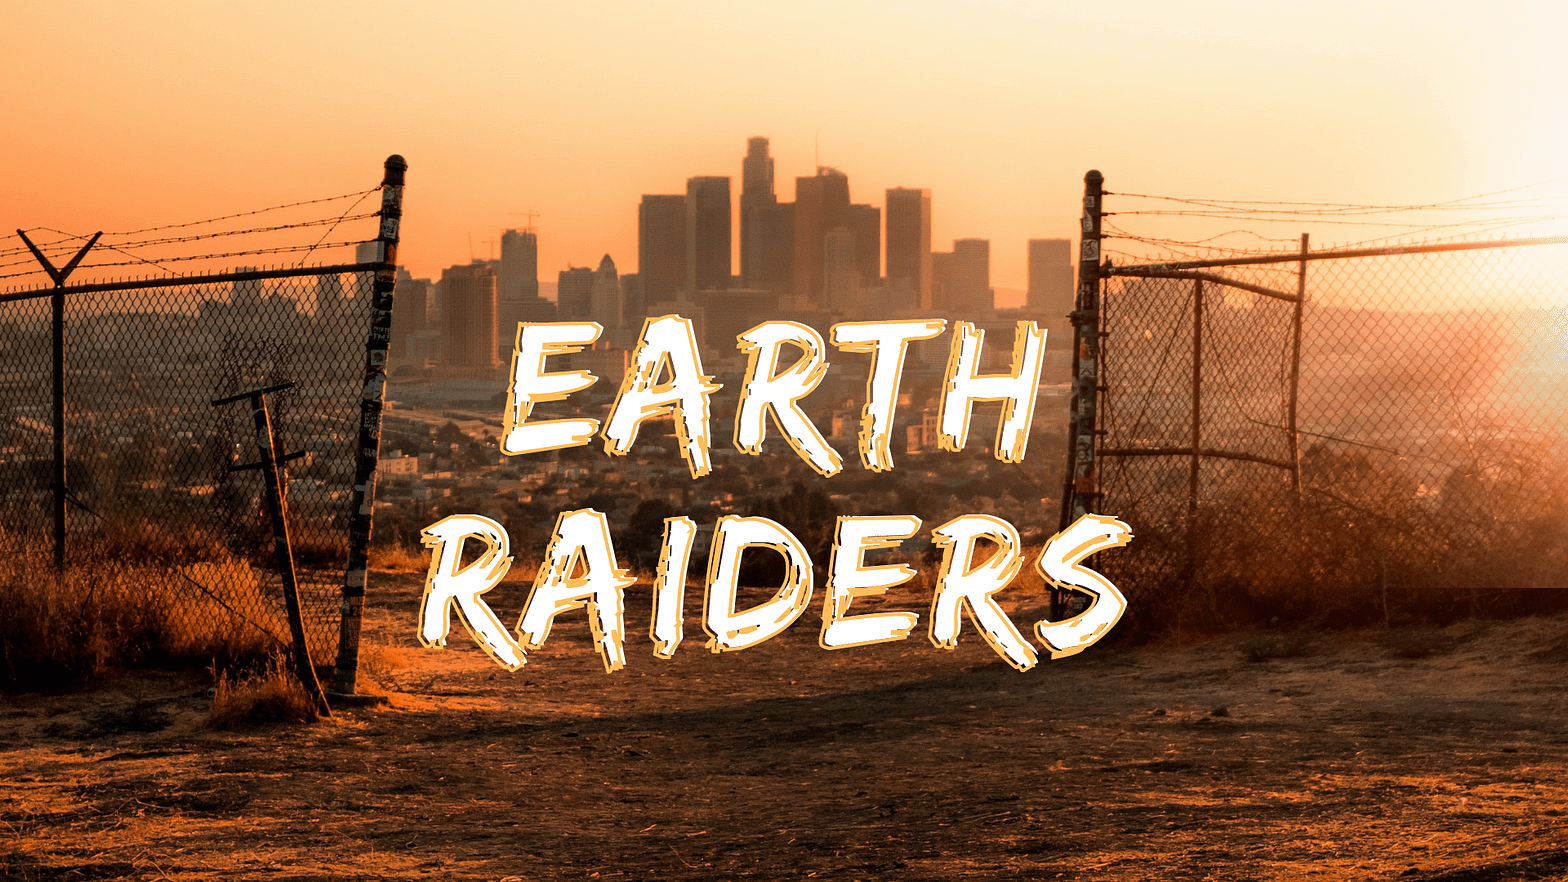 Syllble Productions Announces The Release Of The Collaborative Novel: Earth Raiders